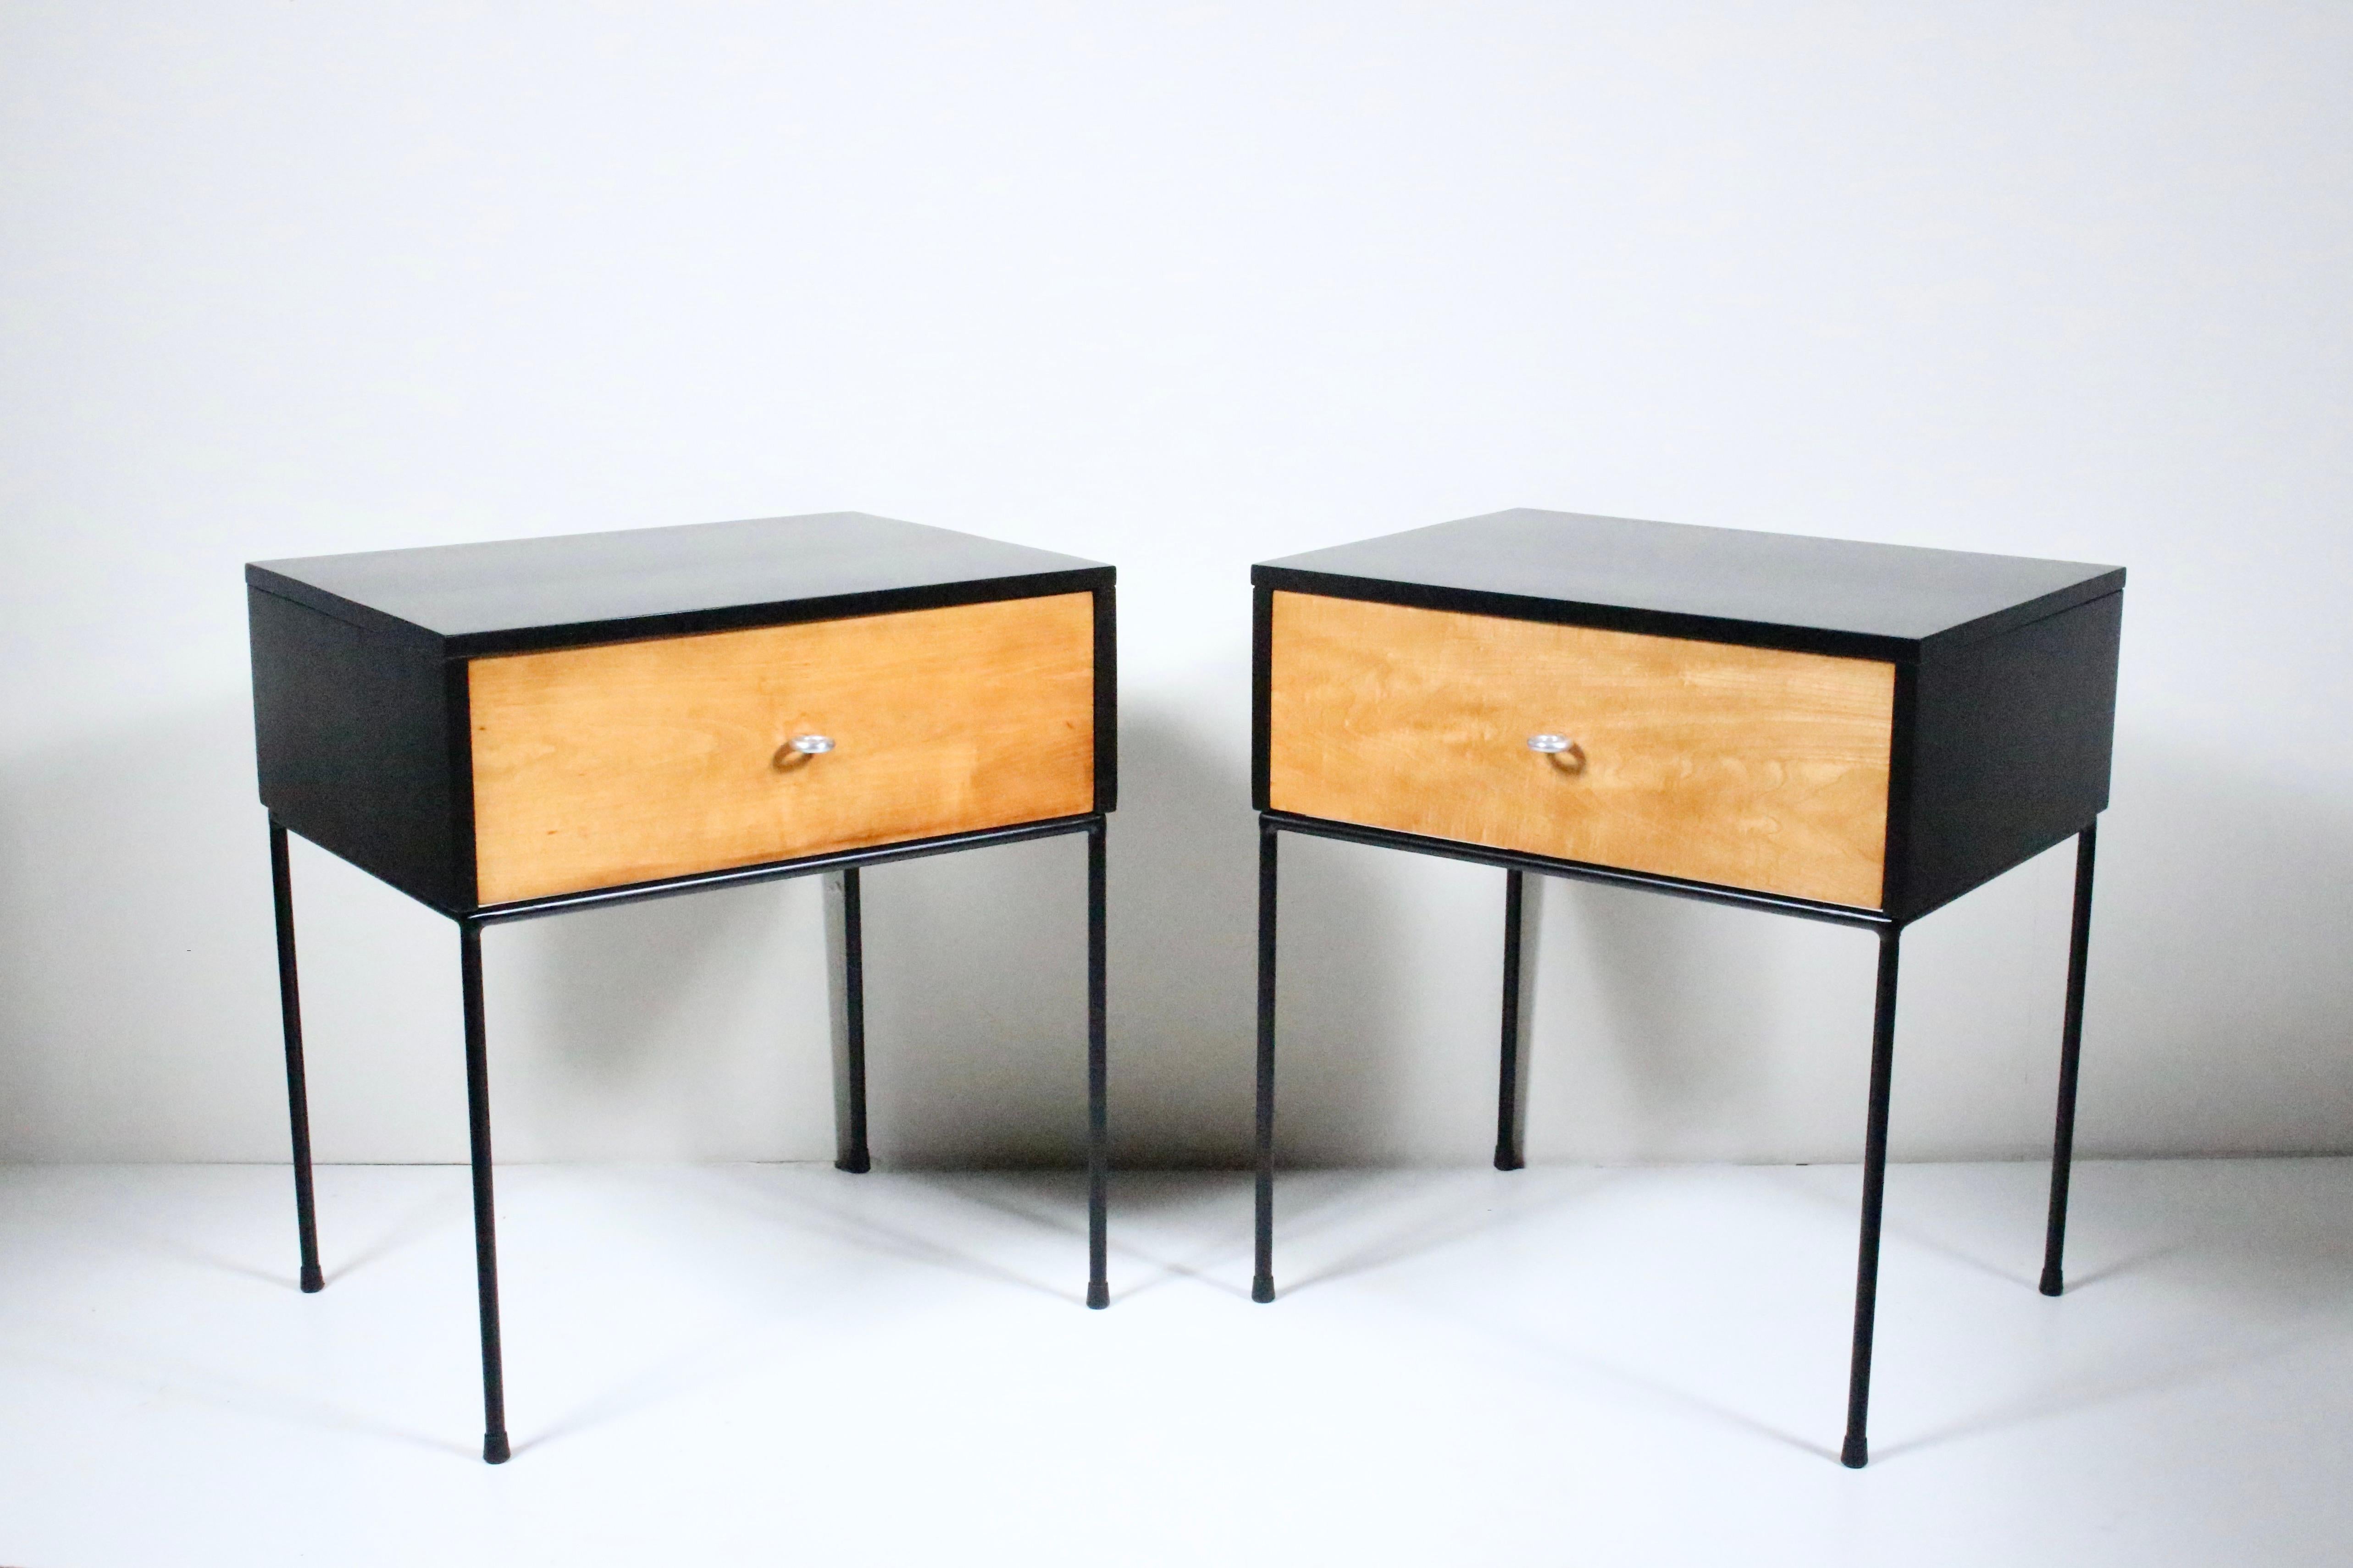 Pair of Paul McCobb planner group 1500-15 Maple & Wrought Iron two tone single 1 drawer chests, end tables, 1950's. Featuring large Natural finish Maple drawers, Black enameled wood exterior cabinet, larger polished Aluminum drawer ring pulls atop